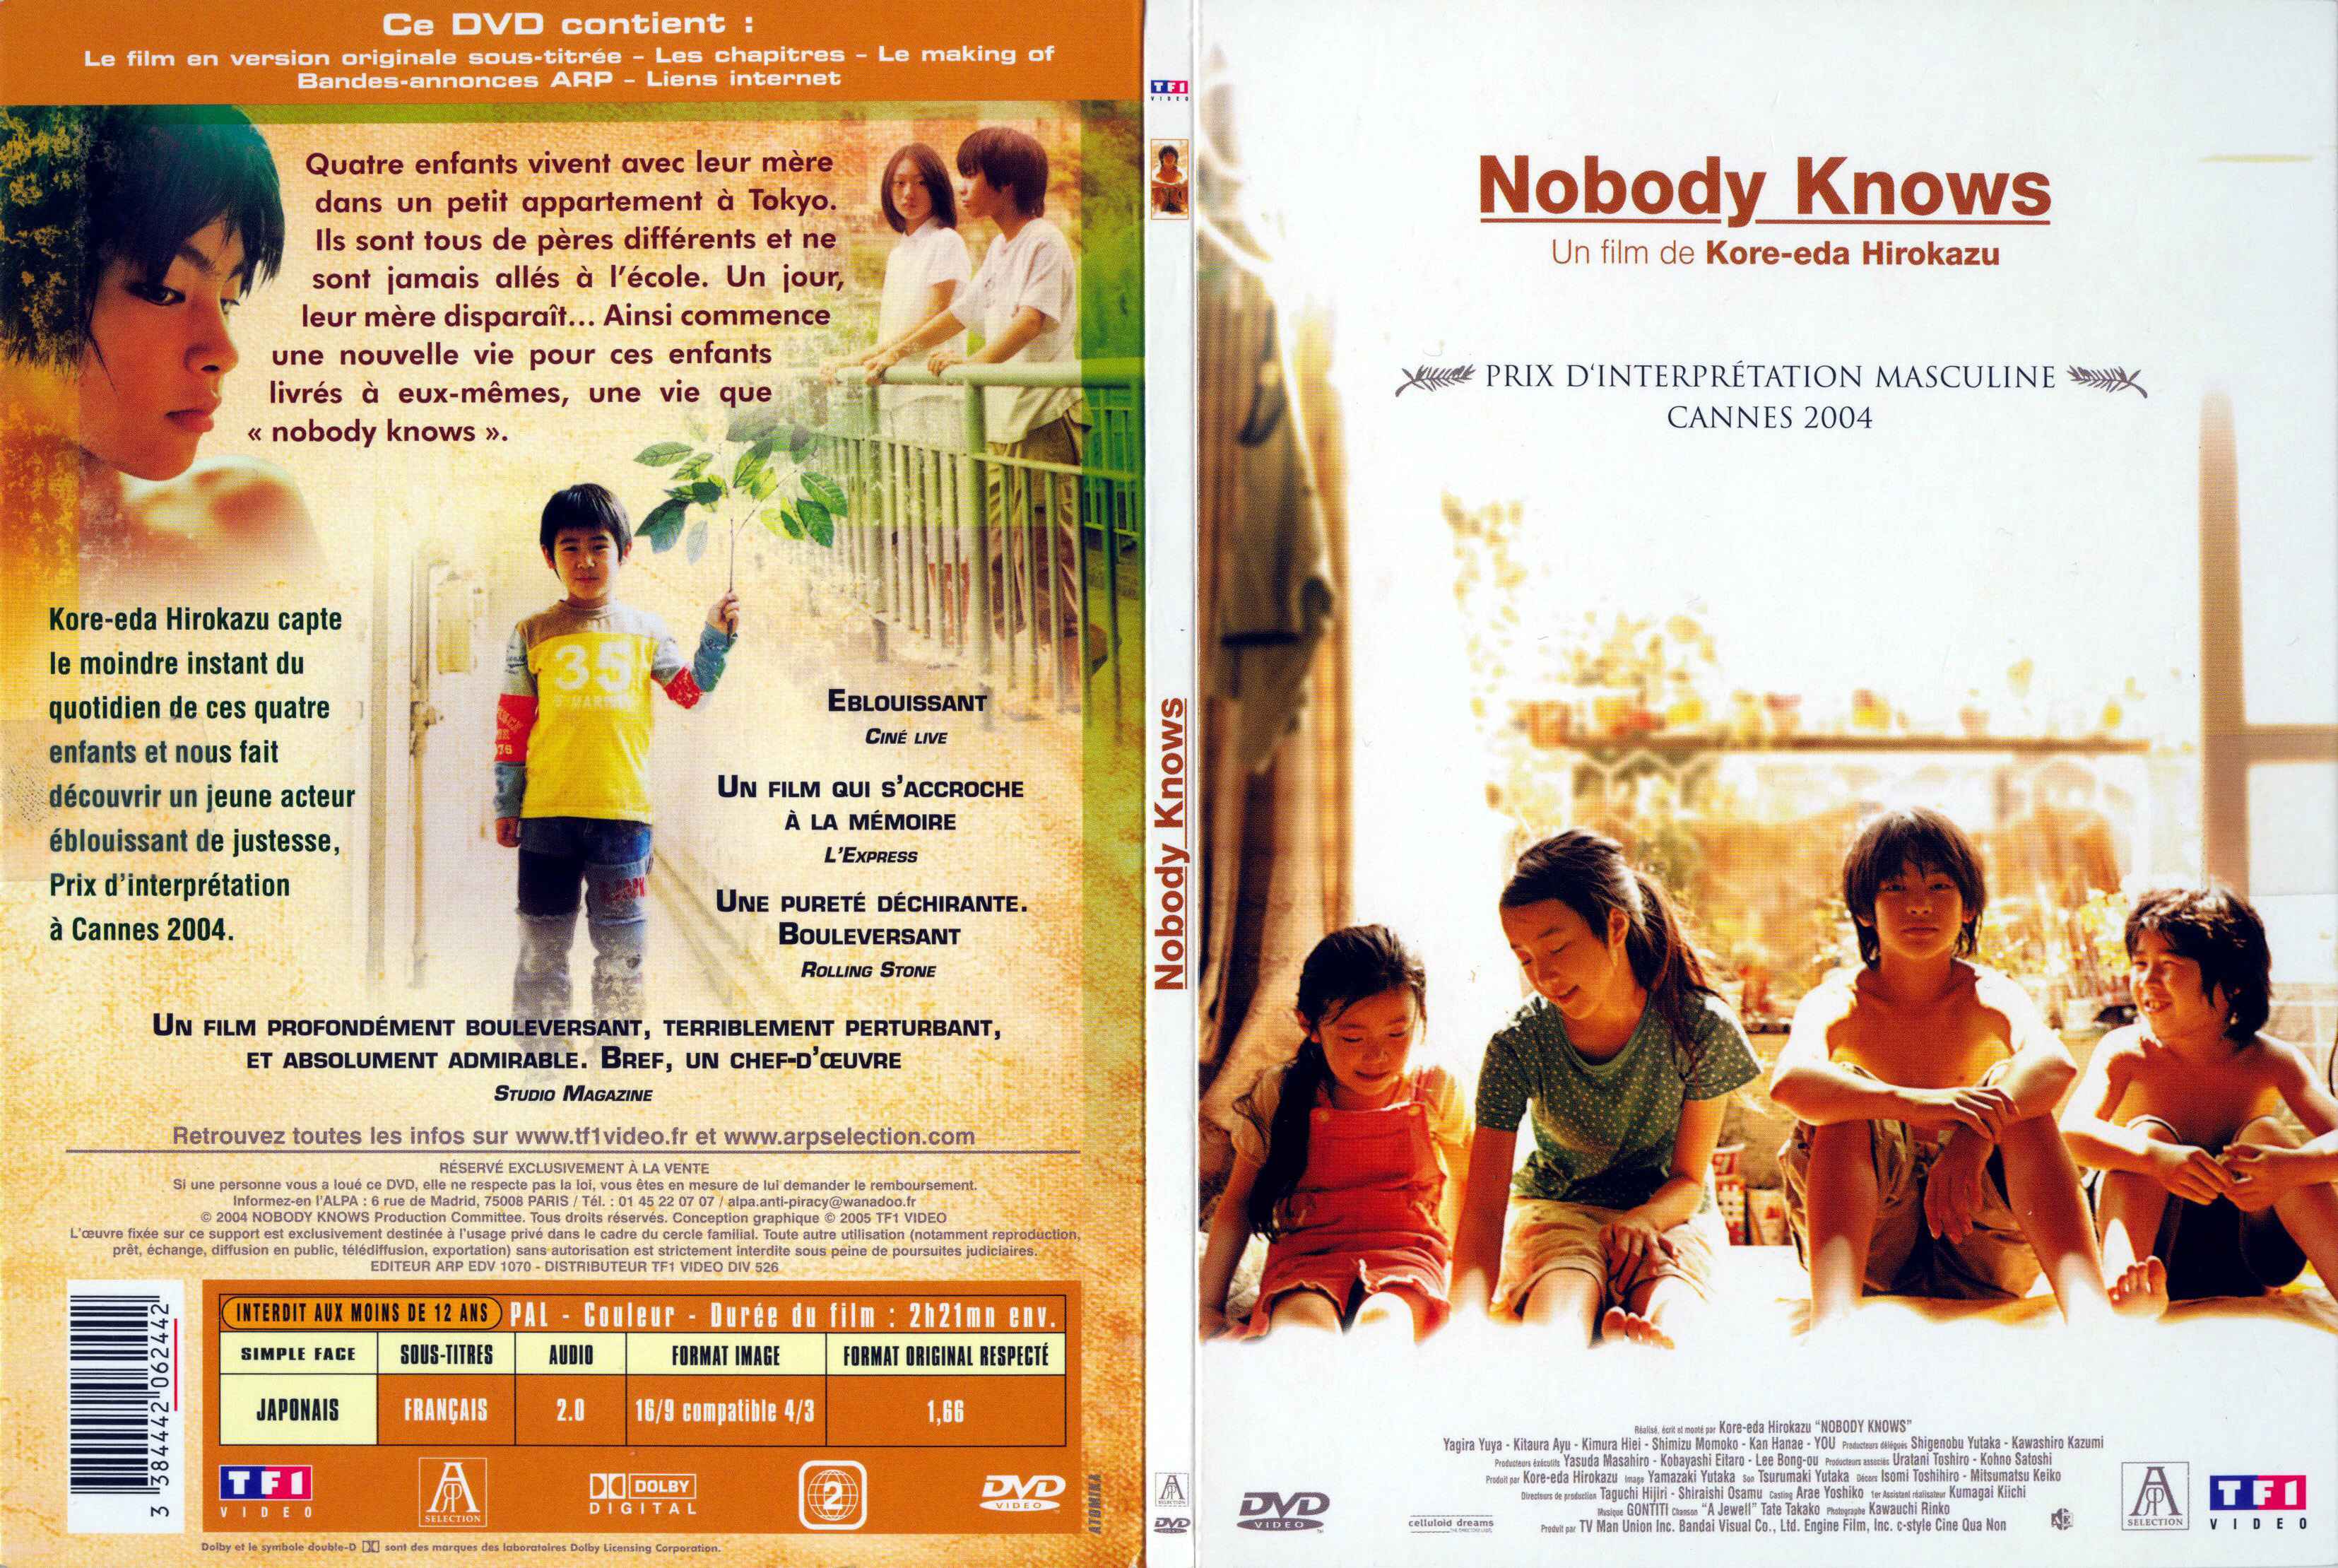 Jaquette DVD Nobody knows - SLIM